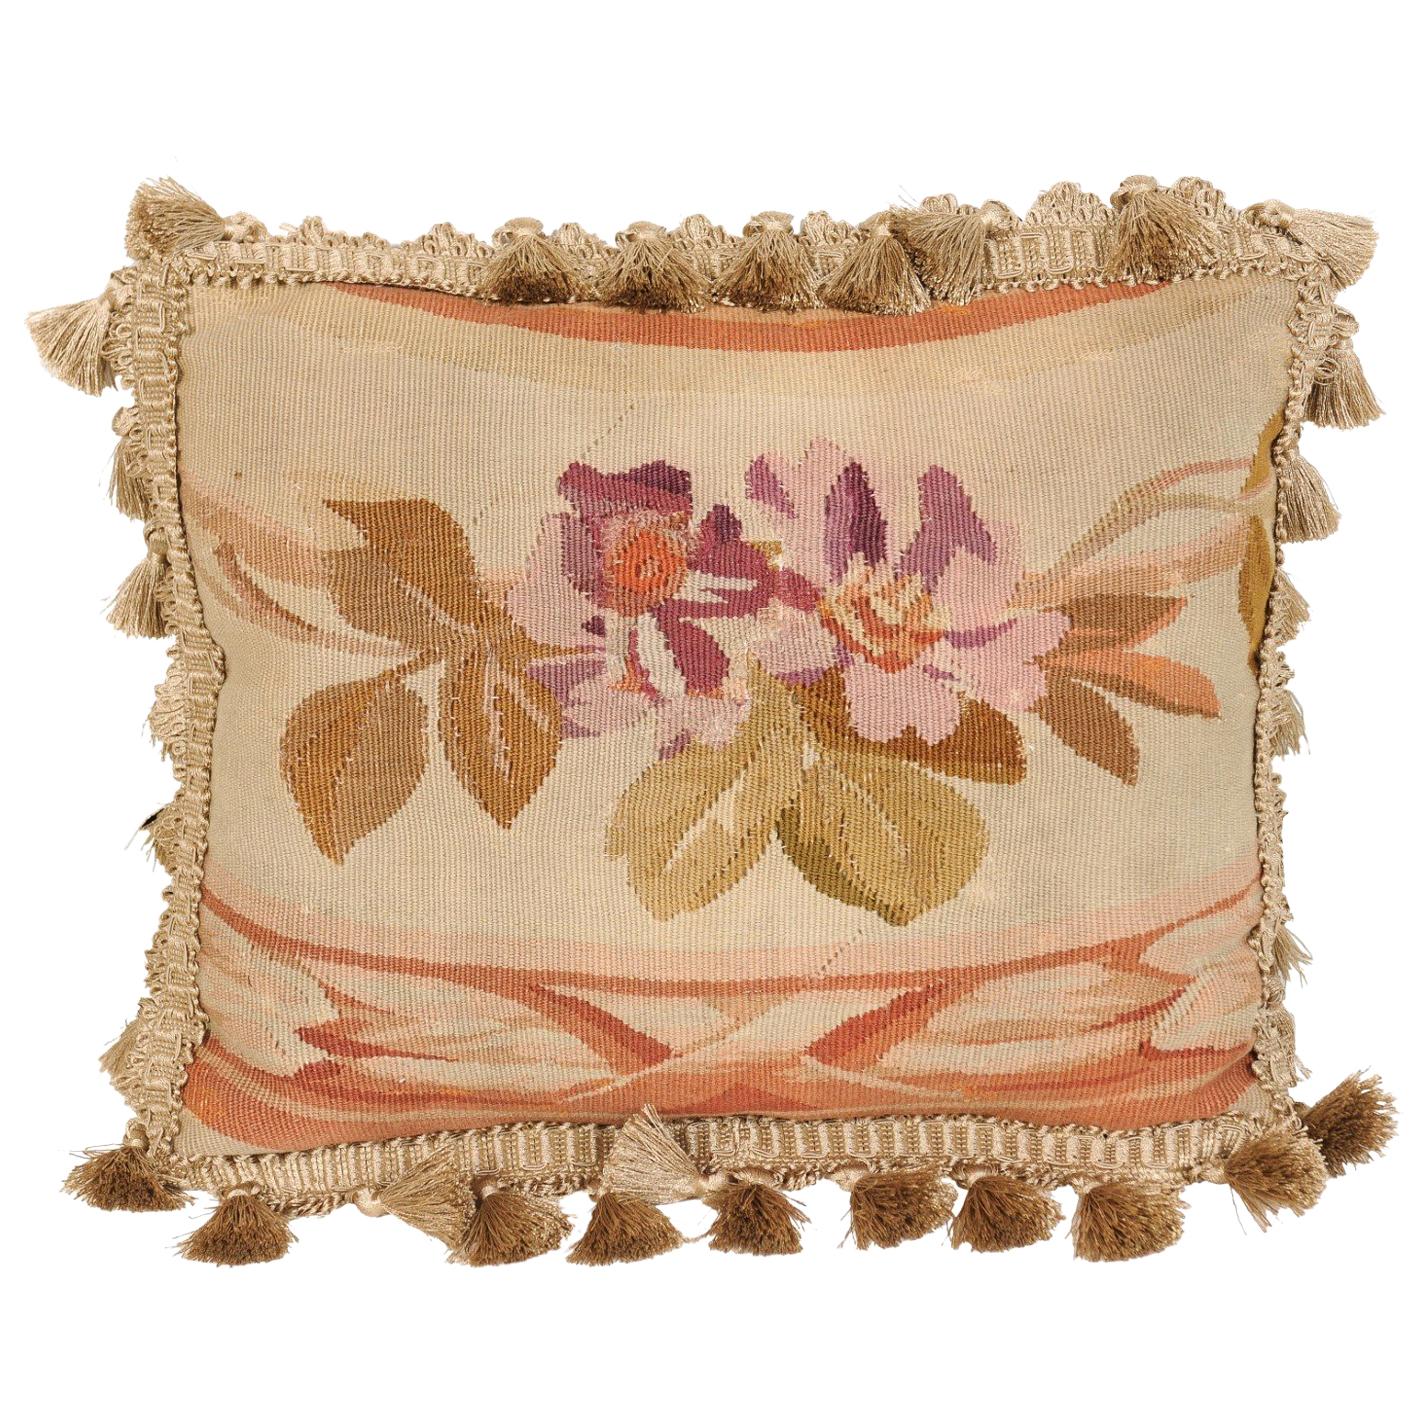 19th Century French Aubusson Tapestry Pillow with Purple Flowers and Tassels For Sale